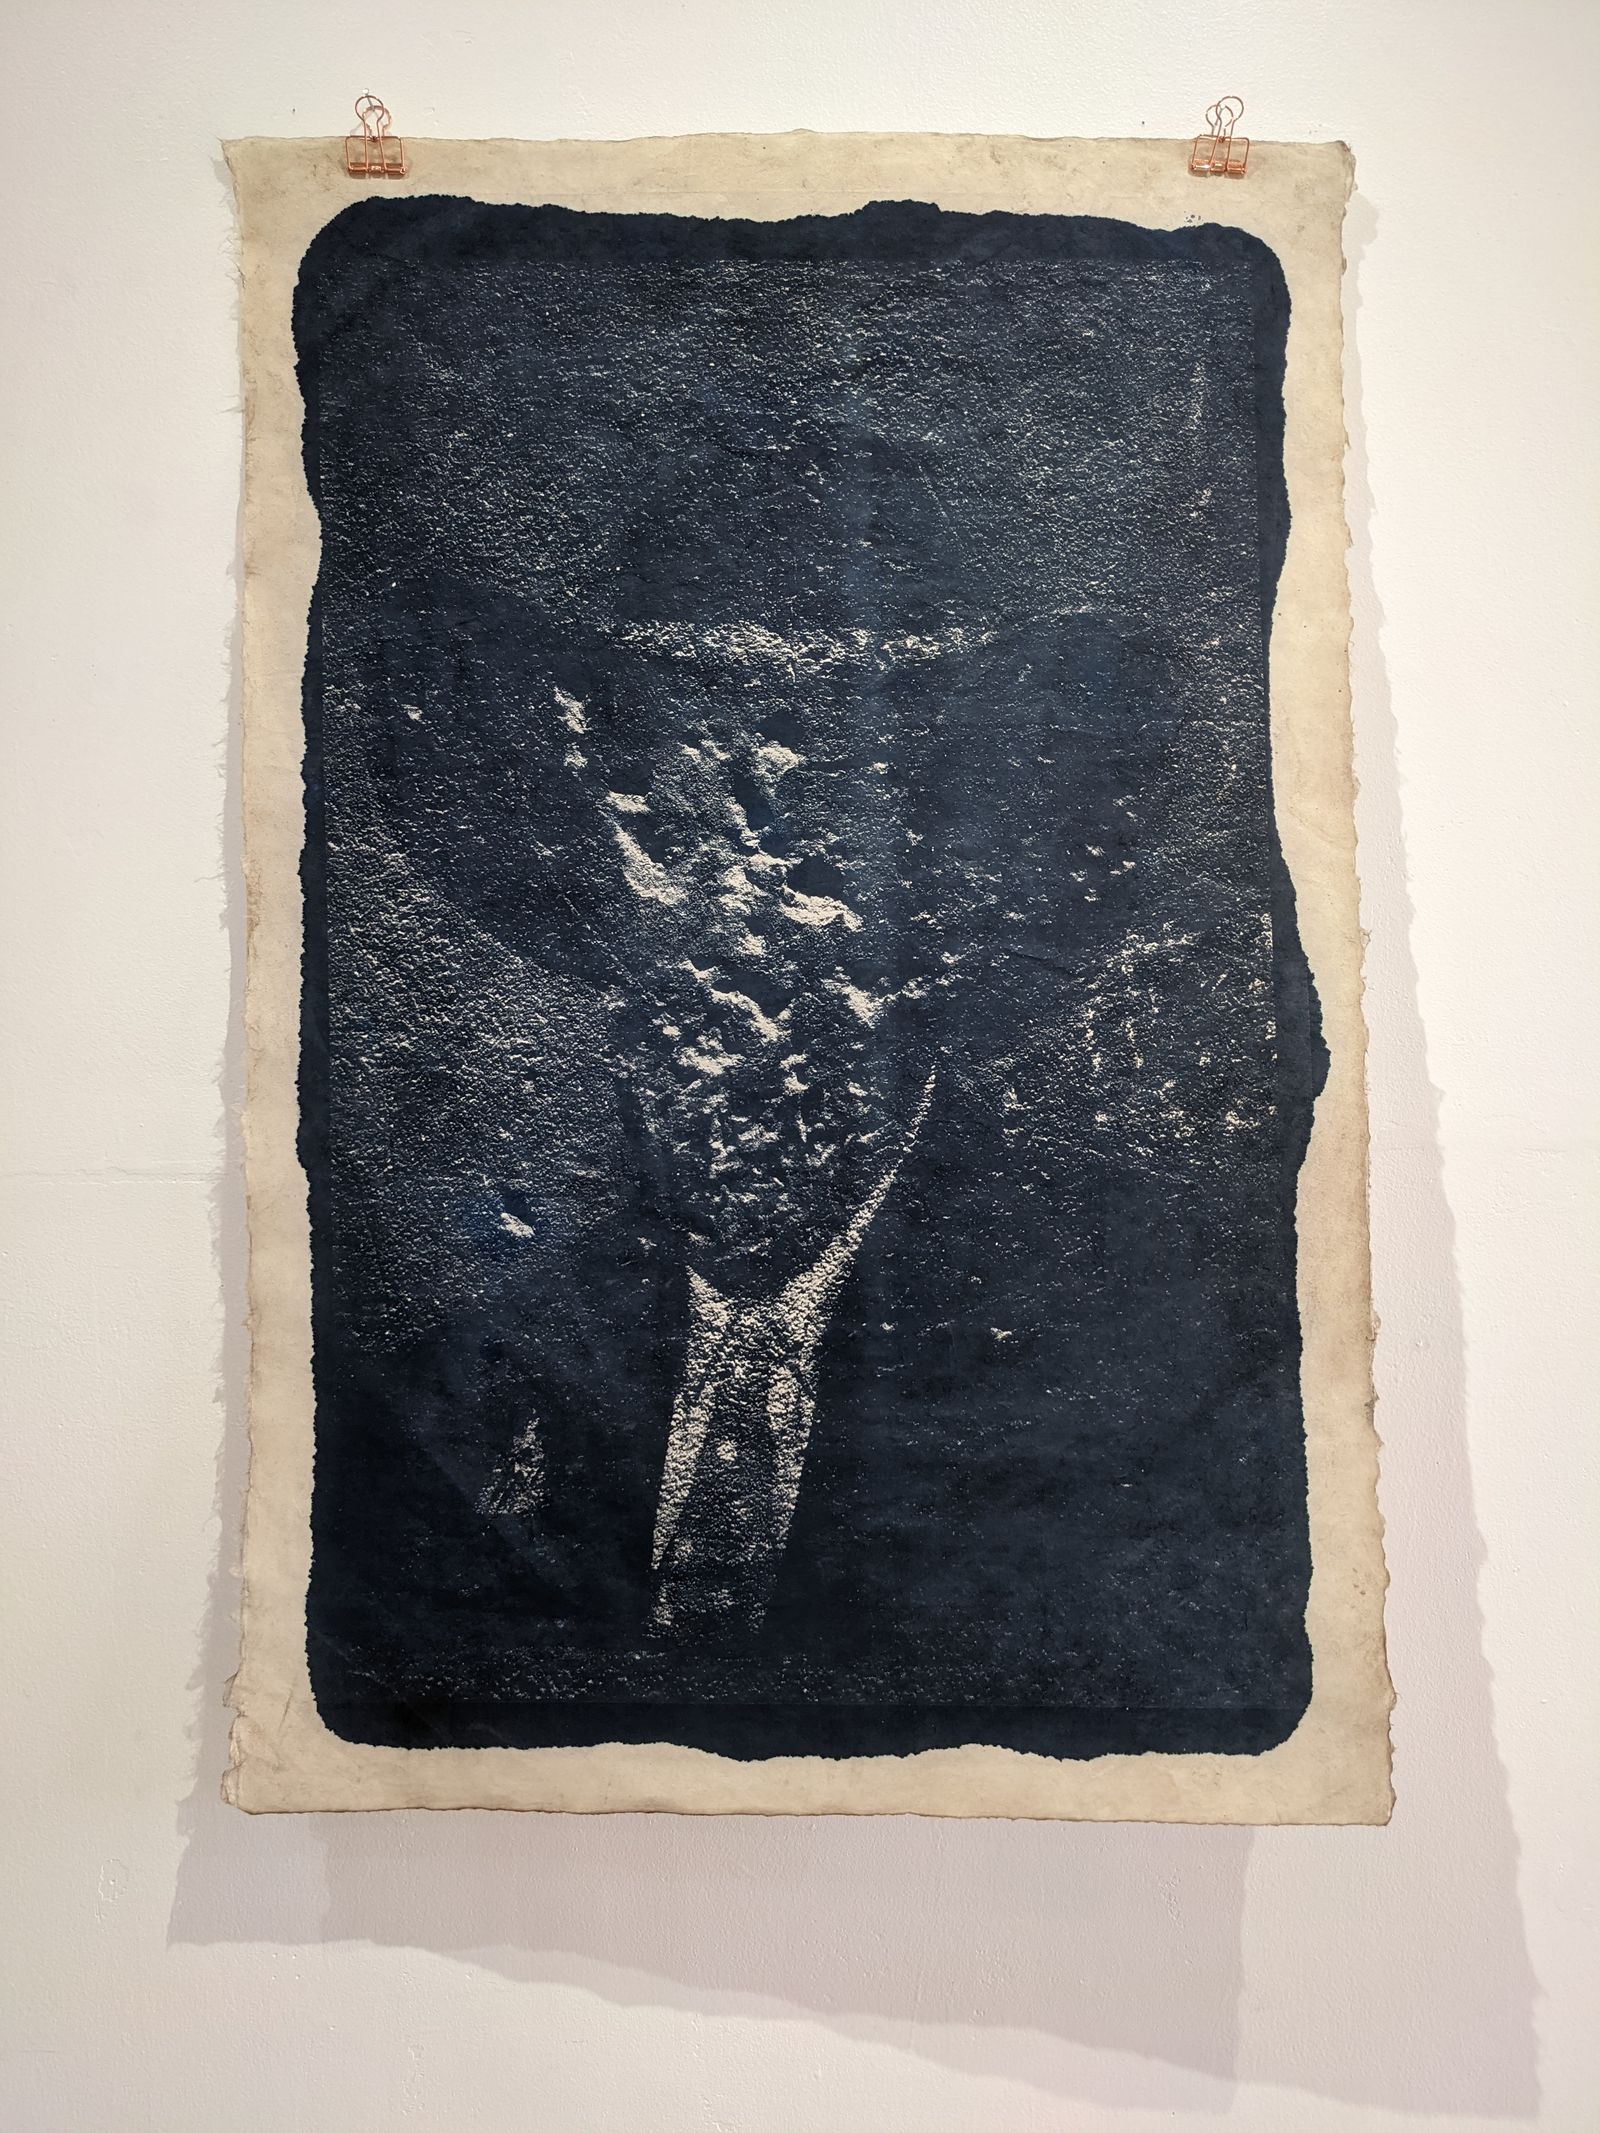 © Tomasz Laczny - Large format cyanotape (tonned in coffe) printed on handmade japanese kozo paper 96x69cm